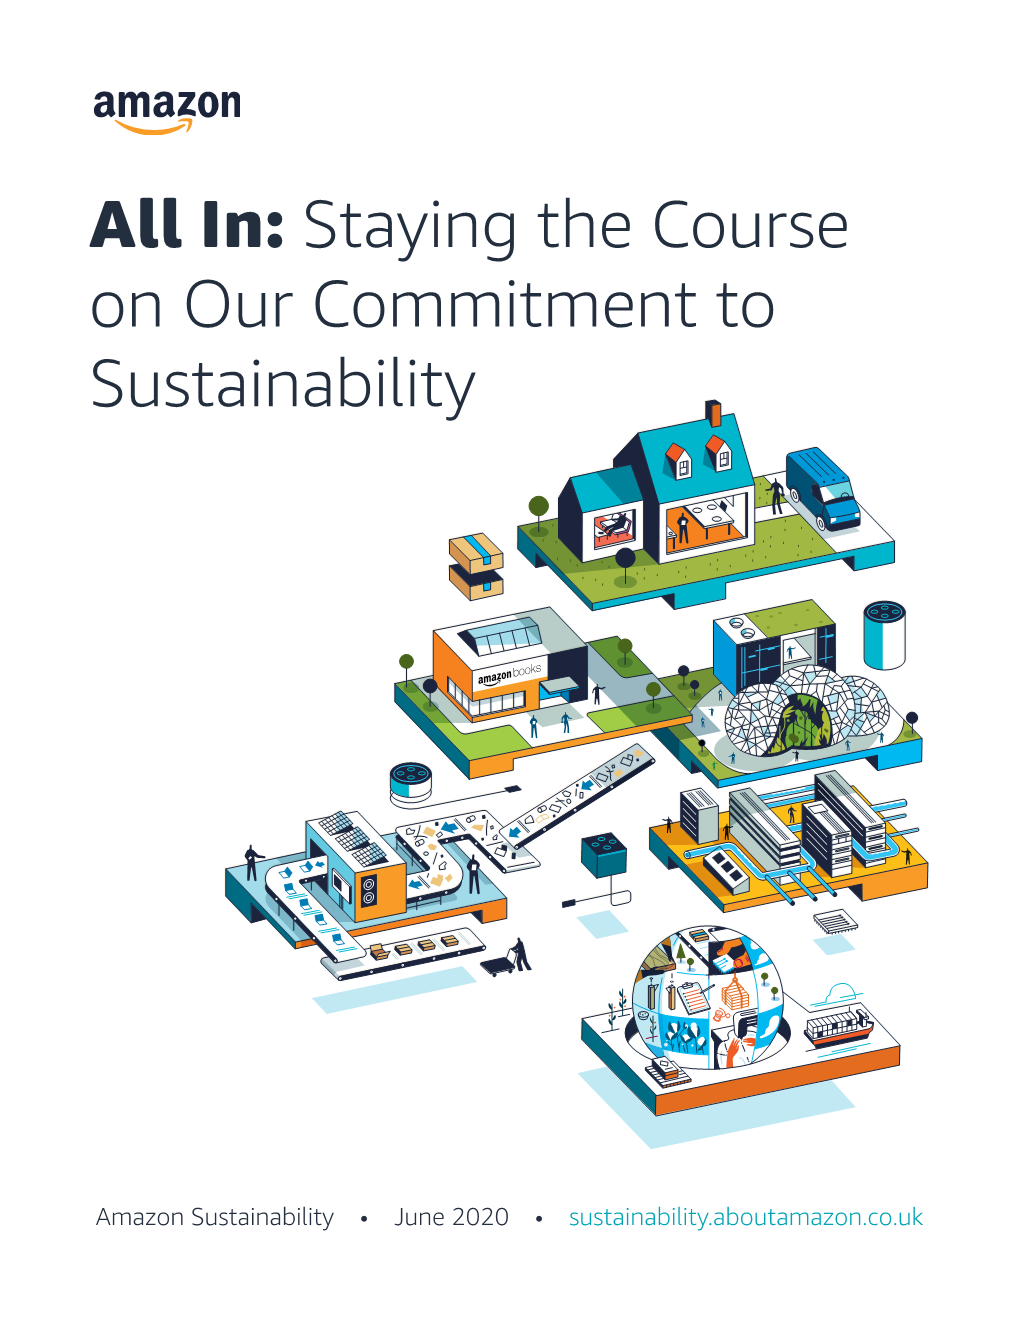 All In: Staying the Course on Our Commitment to Sustainability